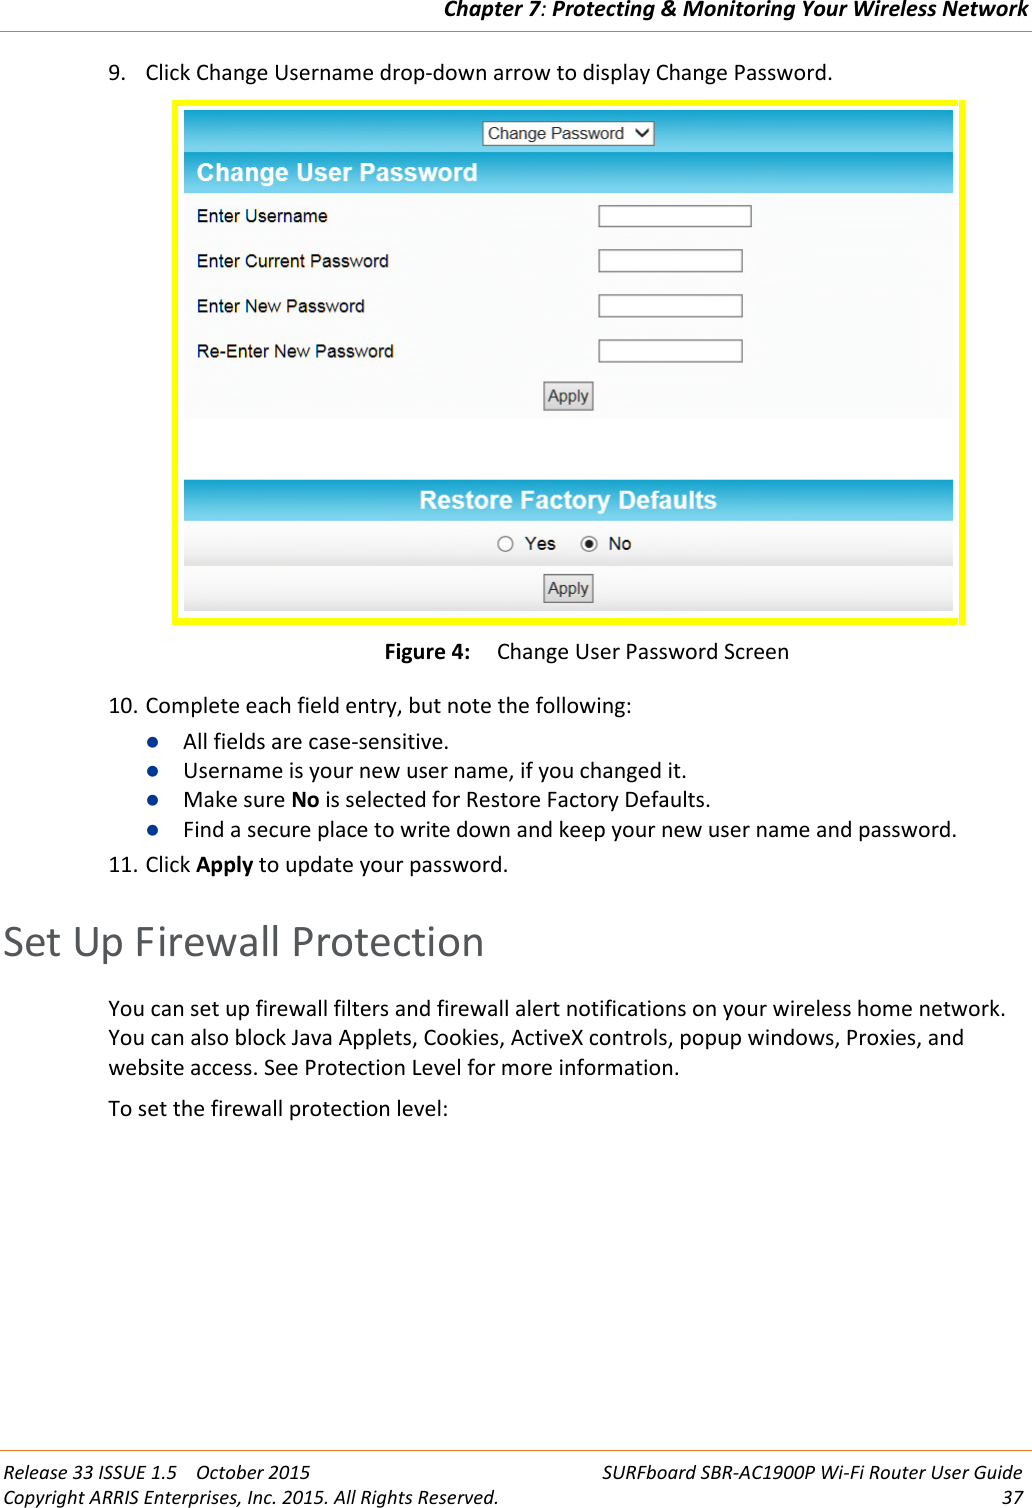 Chapter 7:Protecting &amp; Monitoring Your Wireless NetworkRelease 33 ISSUE 1.5 October 2015 SURFboard SBR-AC1900P Wi-Fi Router User GuideCopyright ARRIS Enterprises, Inc. 2015. All Rights Reserved. 379. Click Change Username drop-down arrow to display Change Password.Figure 4: Change User Password Screen10. Complete each field entry, but note the following:All fields are case-sensitive.Username is your new user name, if you changed it.Make sure No is selected for Restore Factory Defaults.Find a secure place to write down and keep your new user name and password.11. Click Apply to update your password.Set Up Firewall ProtectionYou can set up firewall filters and firewall alert notifications on your wireless home network.You can also block Java Applets, Cookies, ActiveX controls, popup windows, Proxies, andwebsite access. See Protection Level for more information.To set the firewall protection level: